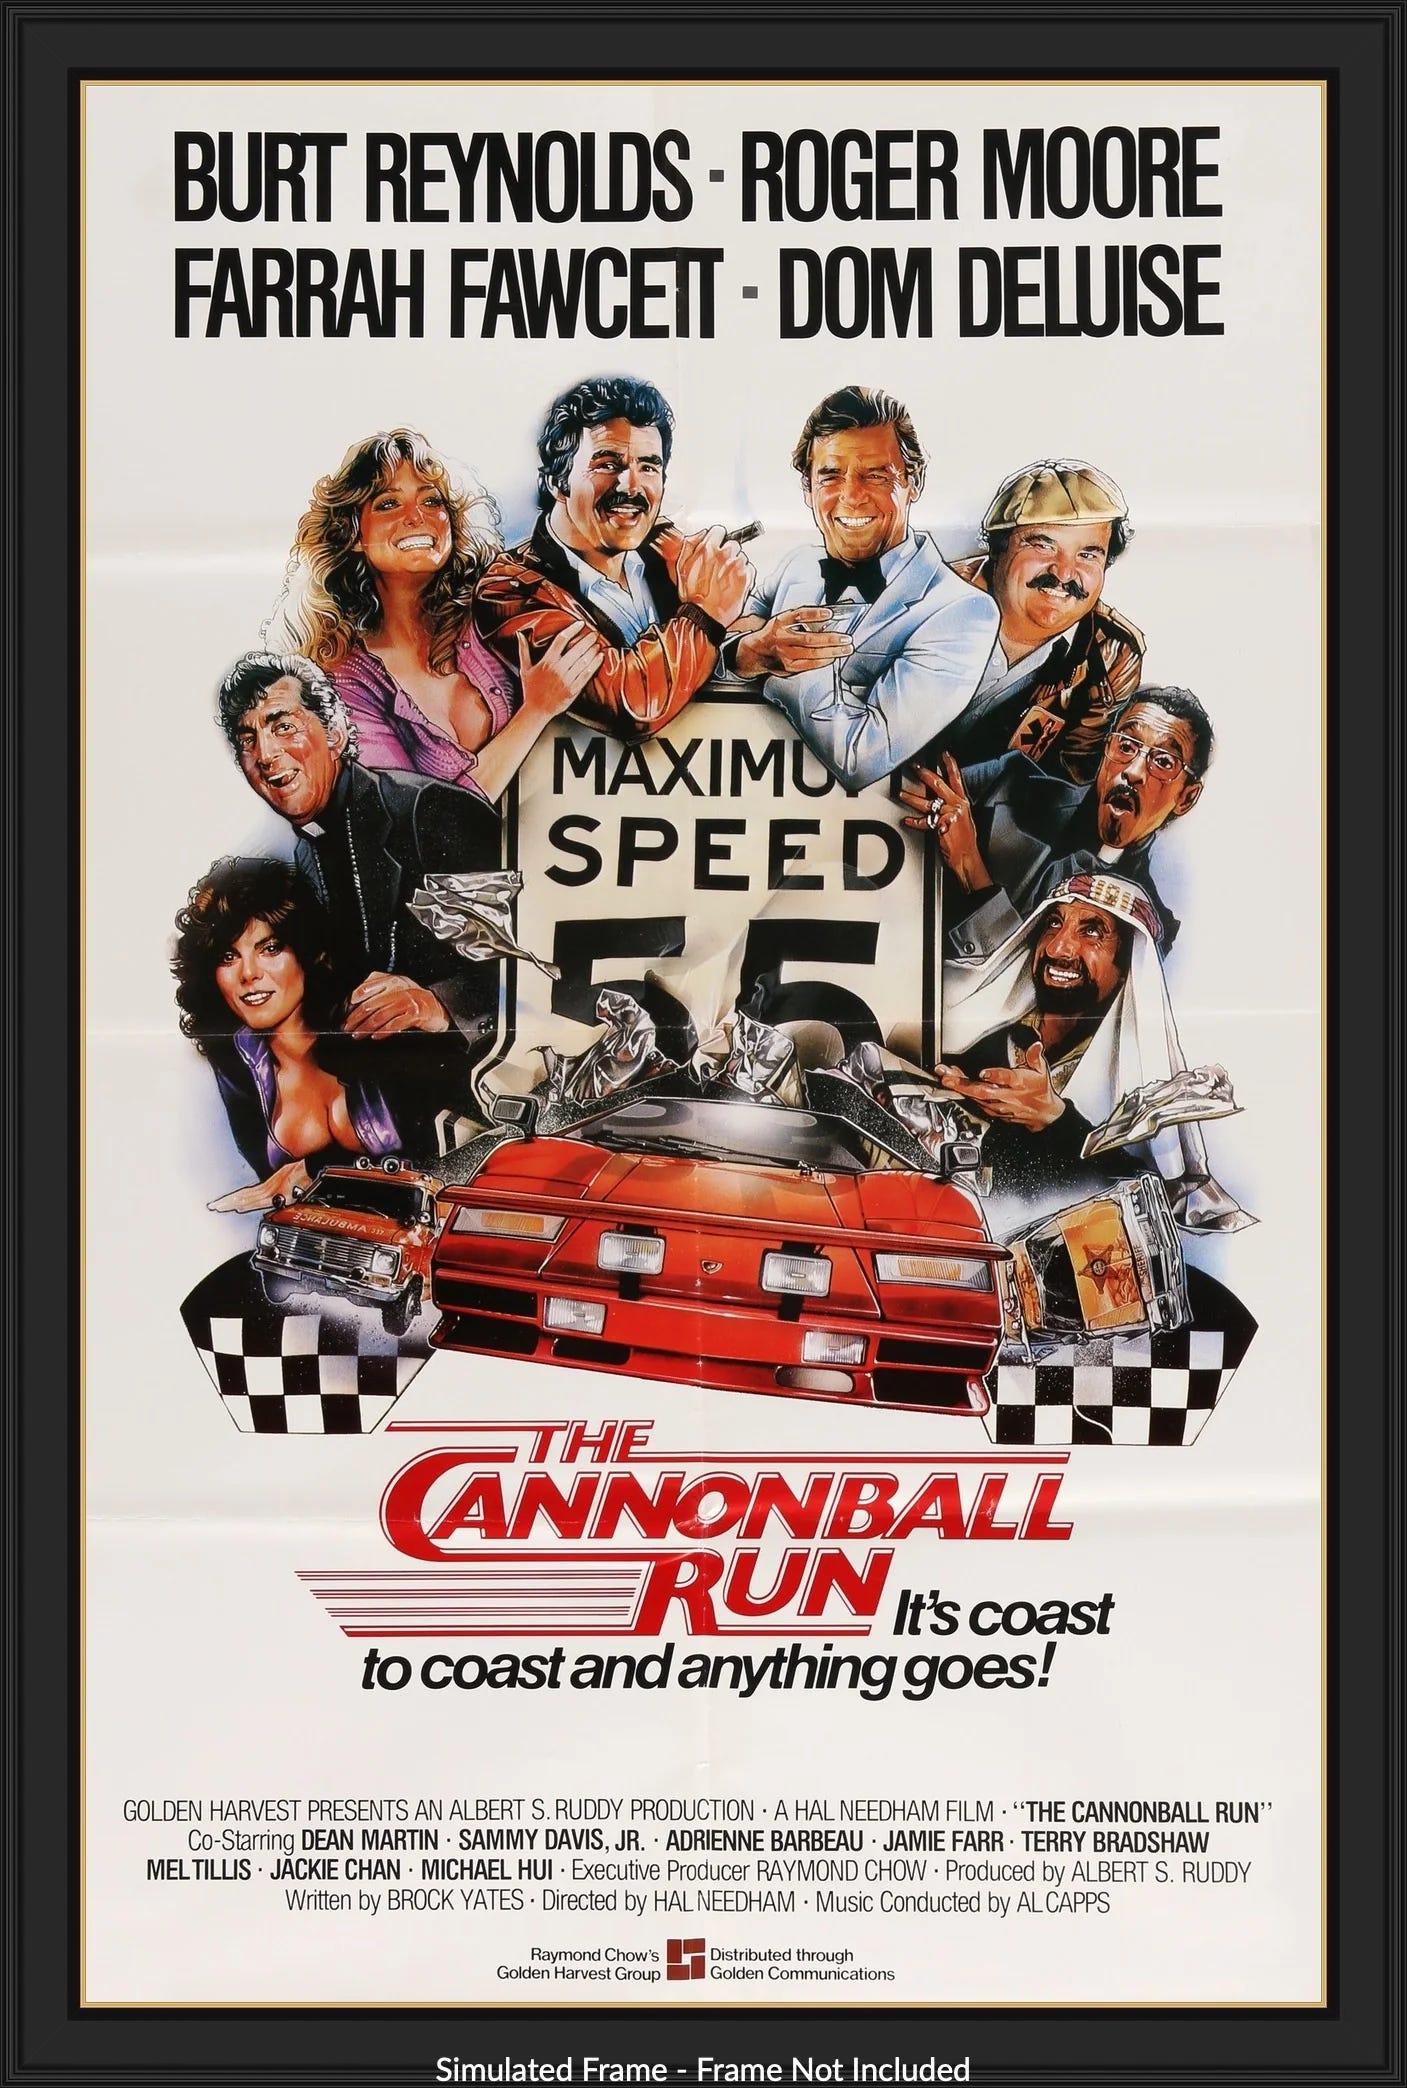 Here are the 2 Lawsuits Filed Against Hal Needham & The Cannonball Run